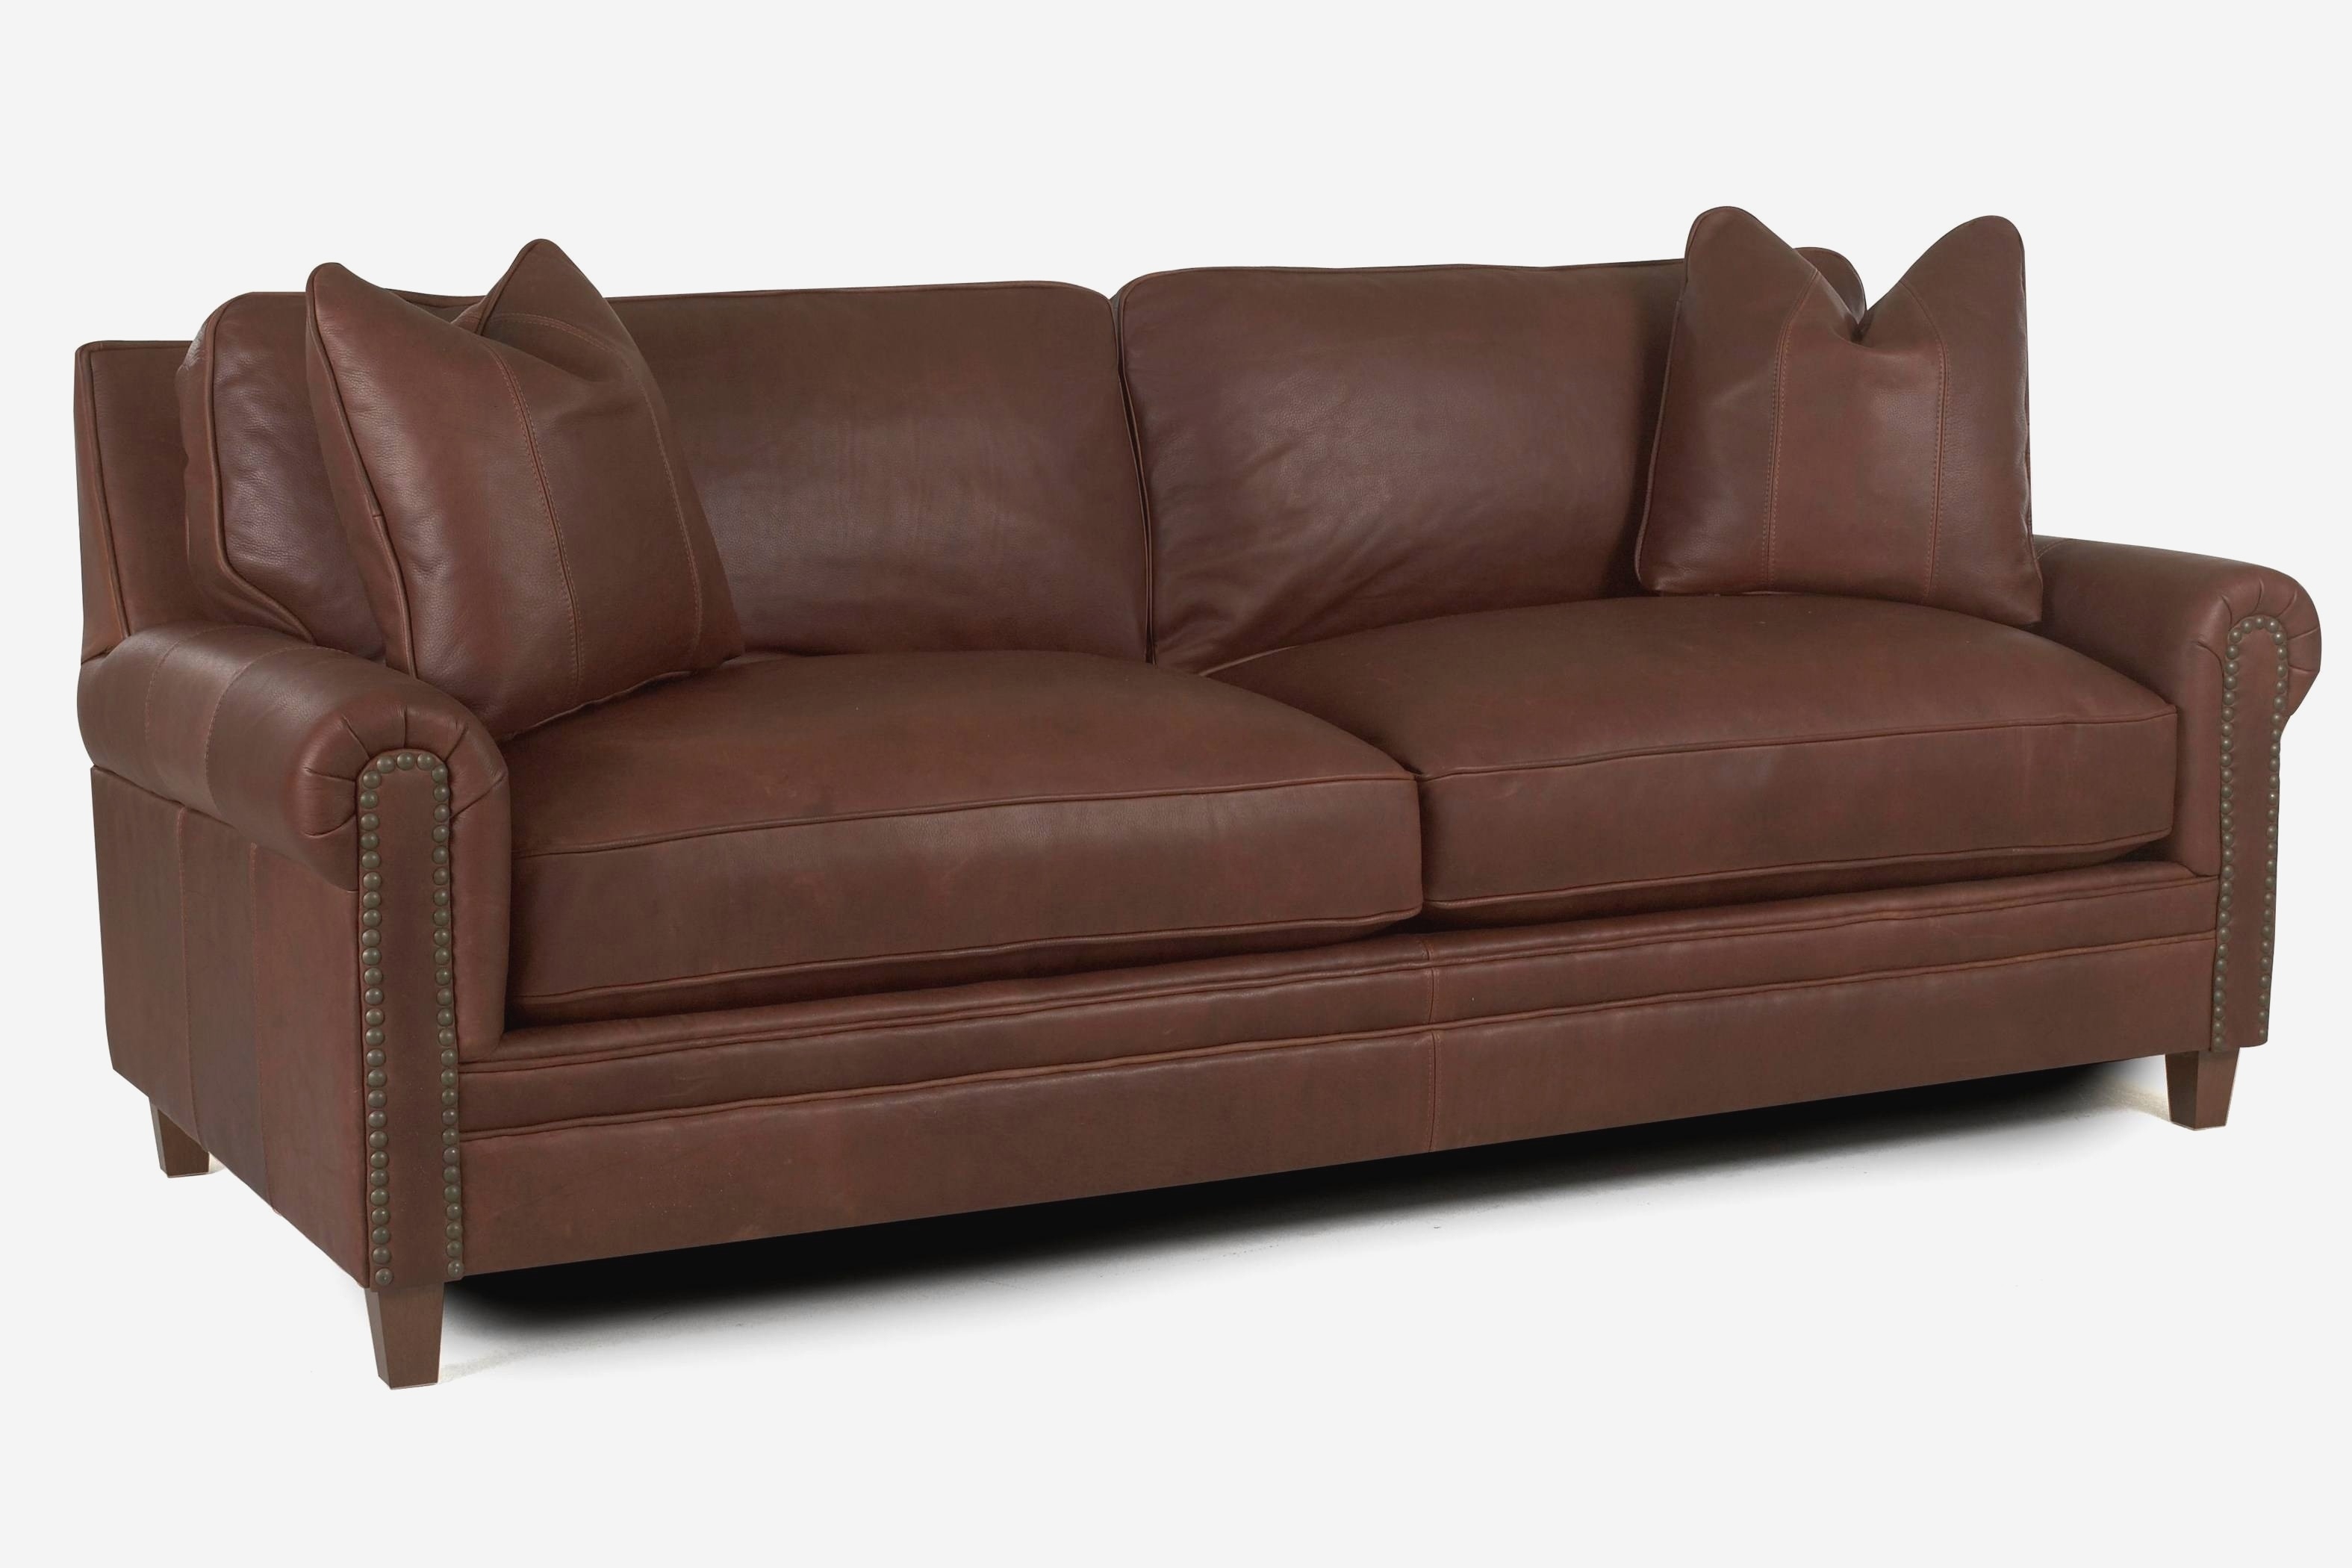 sears sofa beds and futons